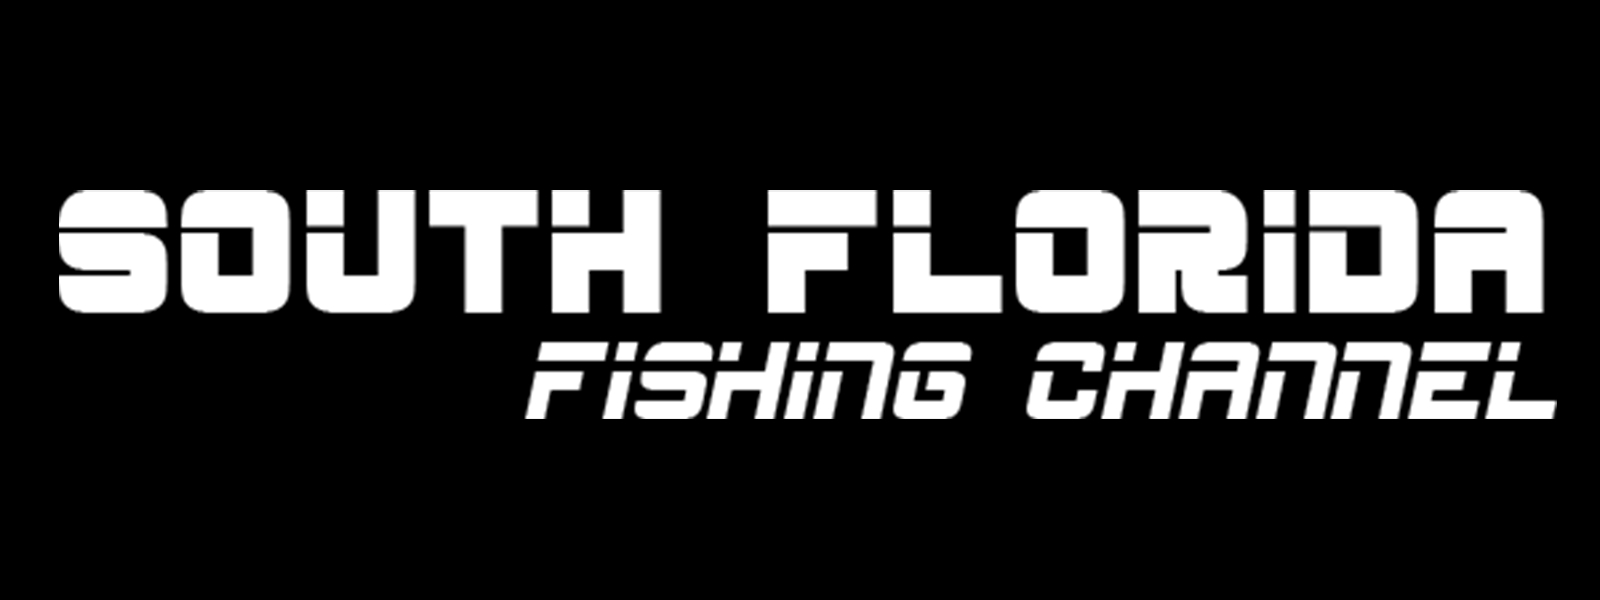 South Florida Fishing Channel on Man Made Customs